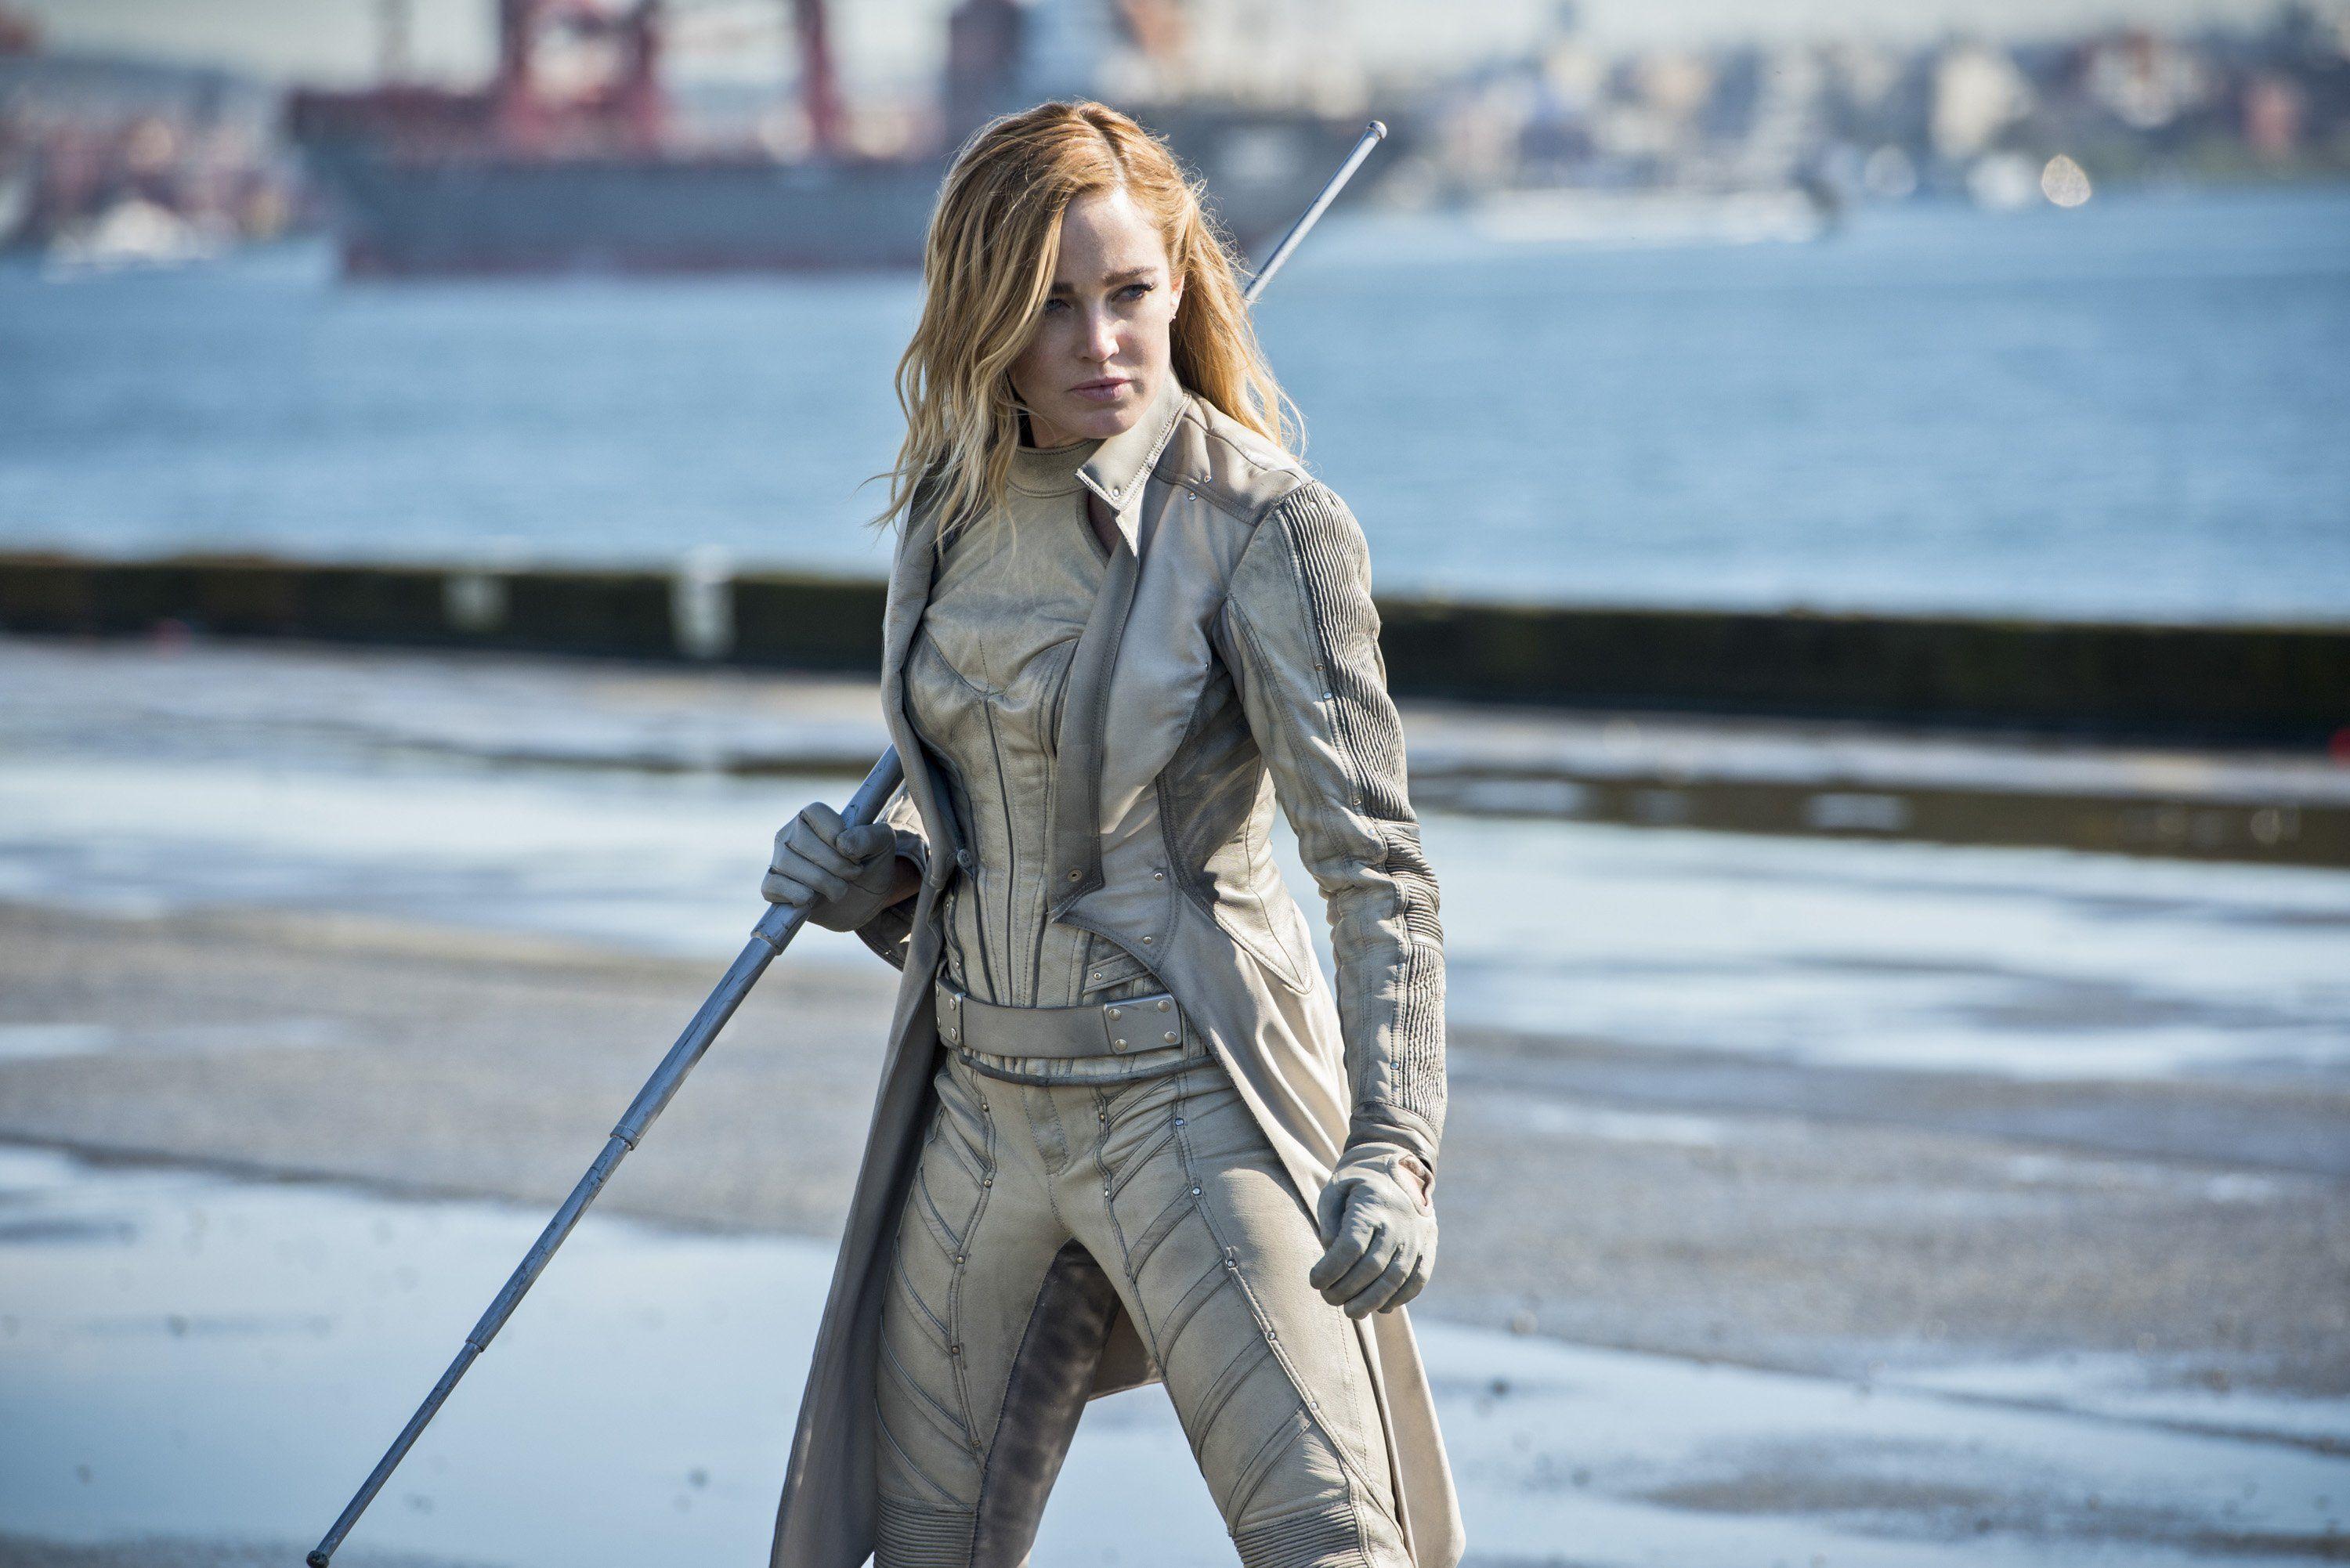 Sara In Legends Of Tomorrow, HD Tv Shows, 4k Wallpaper, Image